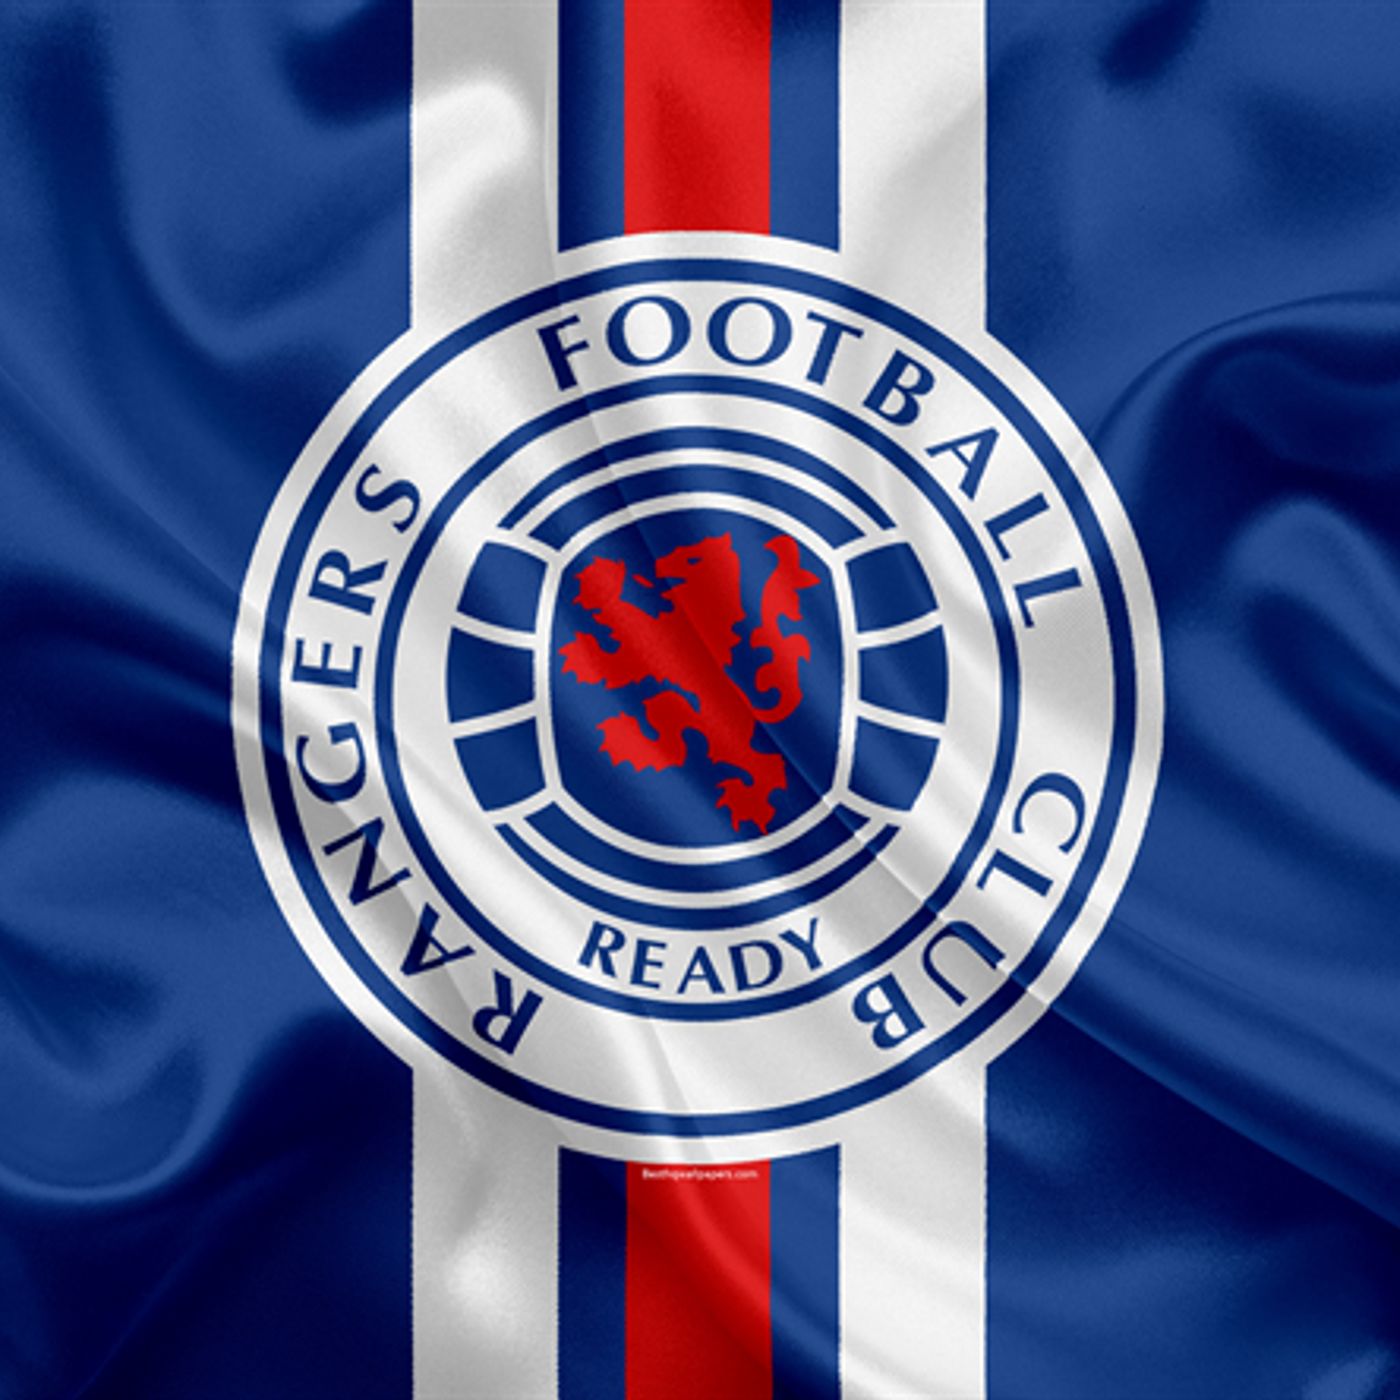 Seven Of The Best (7OTB) players to ever play for Rangers FC